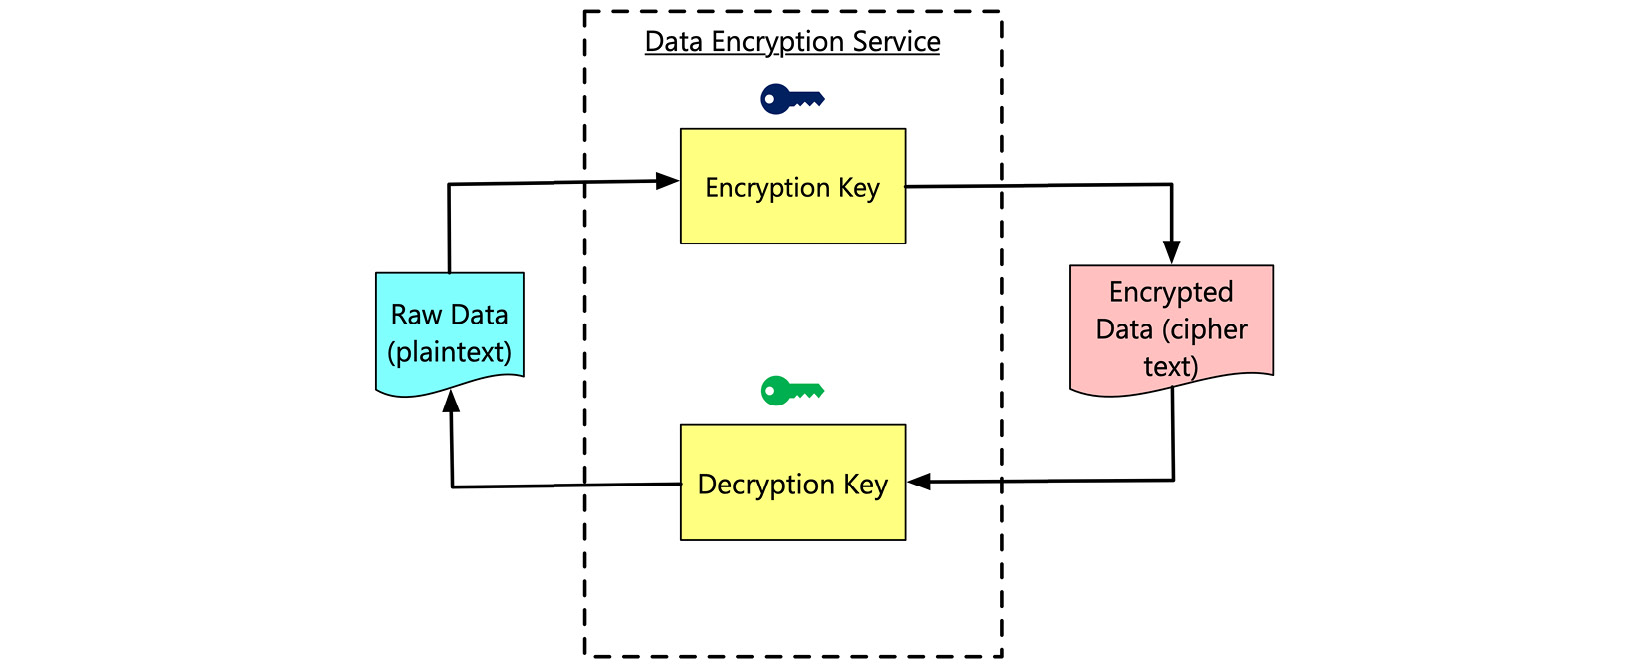 Figure 7.5 – The high-level process of data encryption
